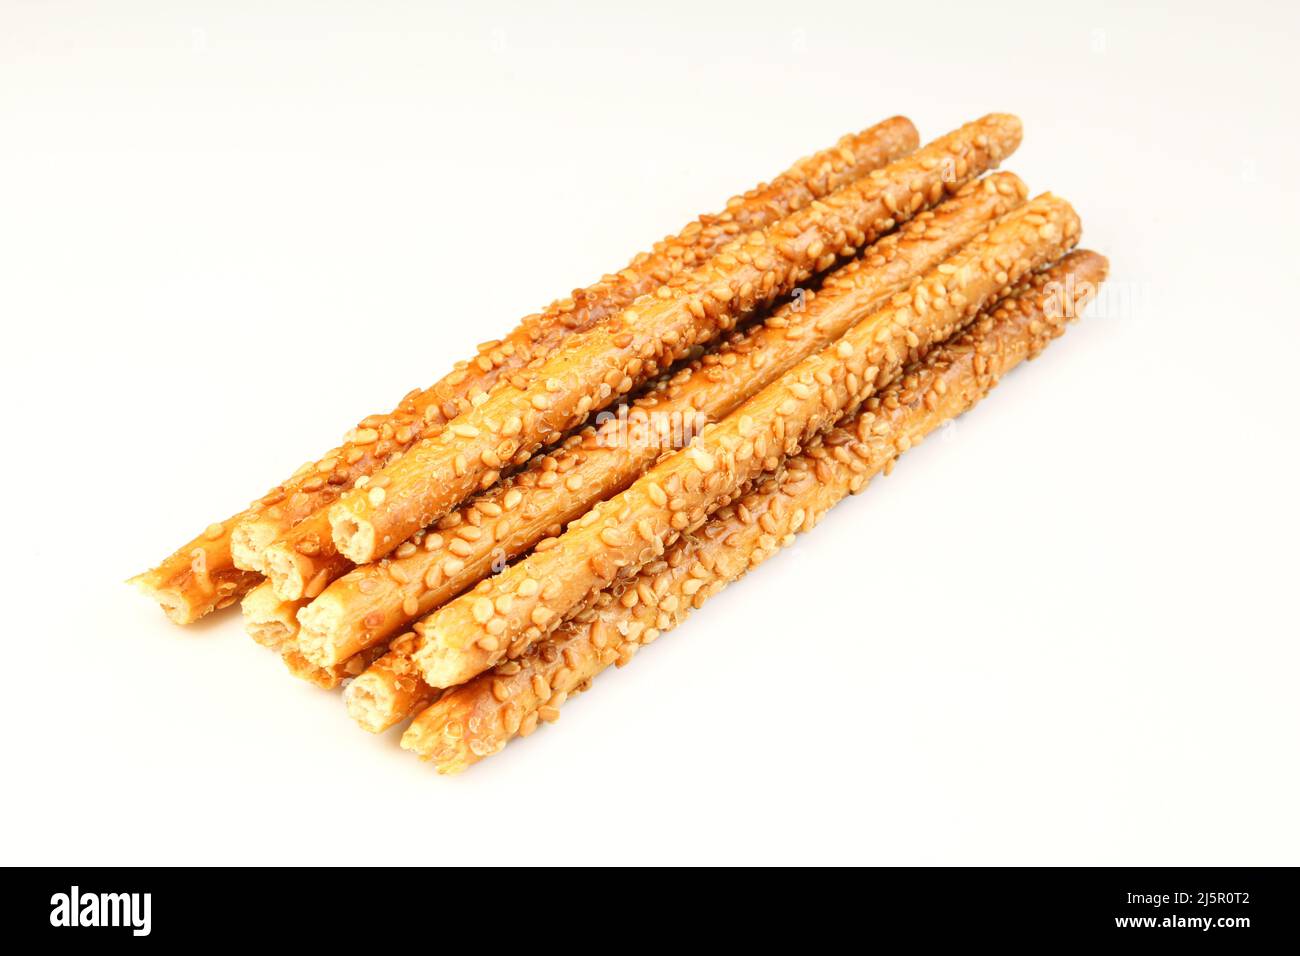 Stack of wheat sticks with sesame seeds idolated on white background Stock Photo